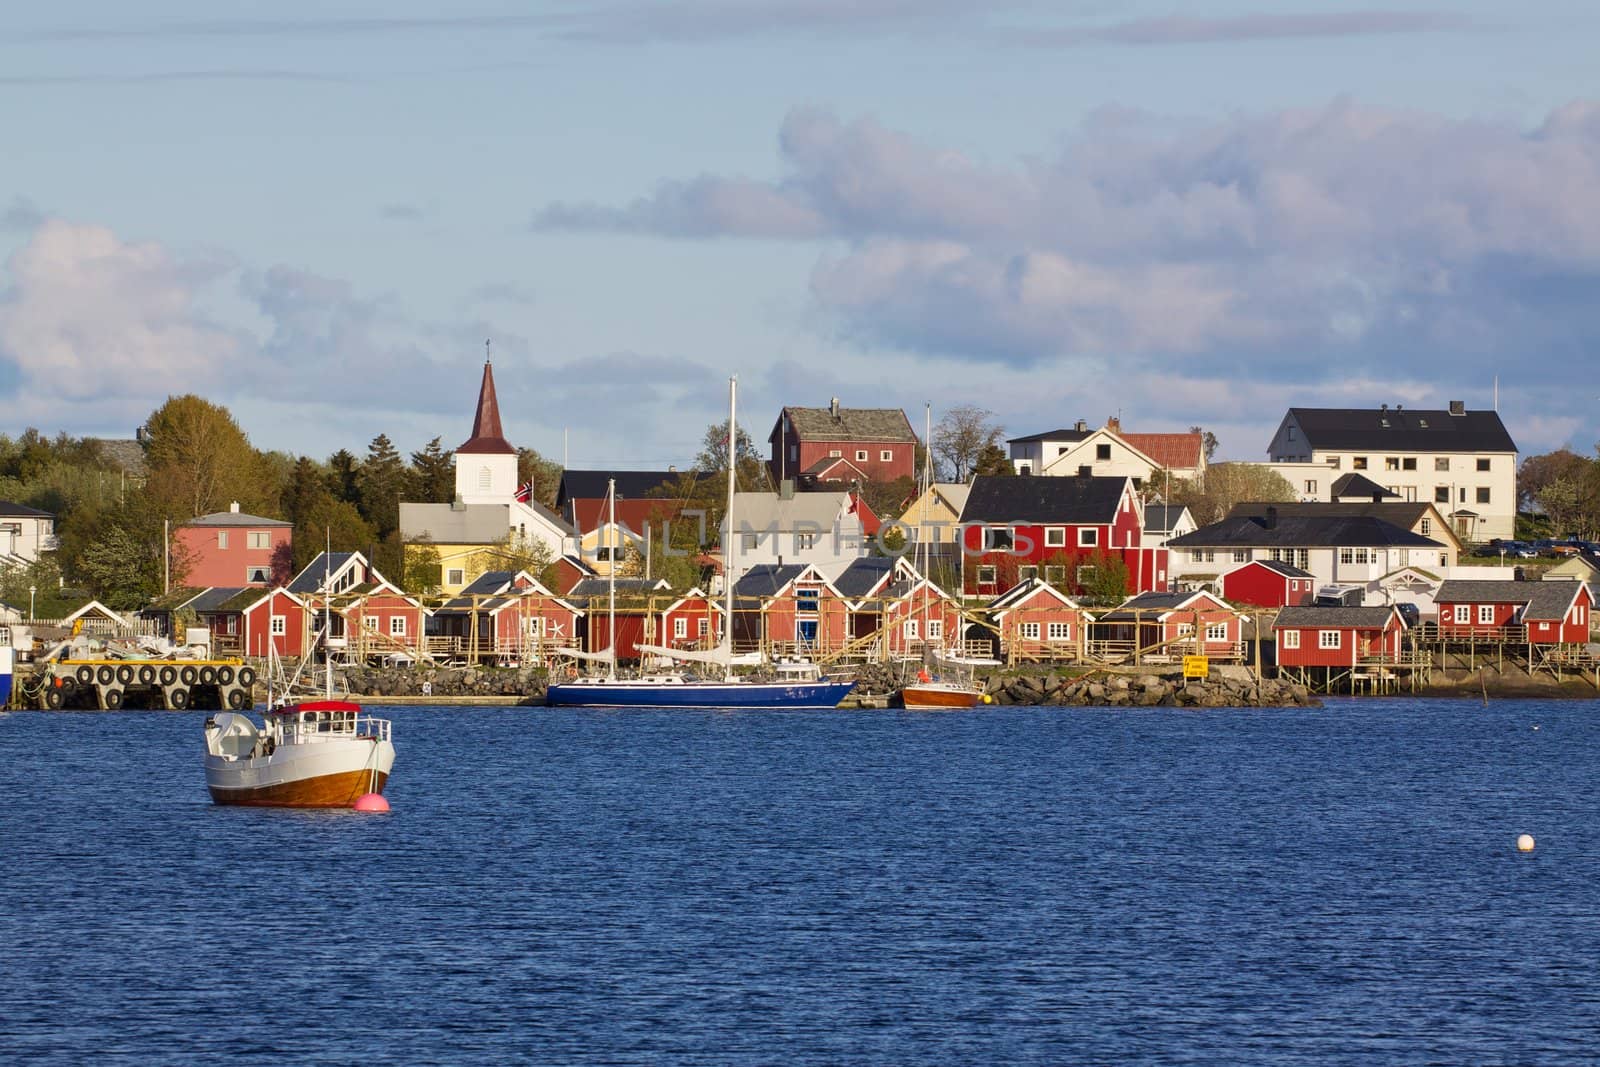 Fishing village in Norway by Harvepino